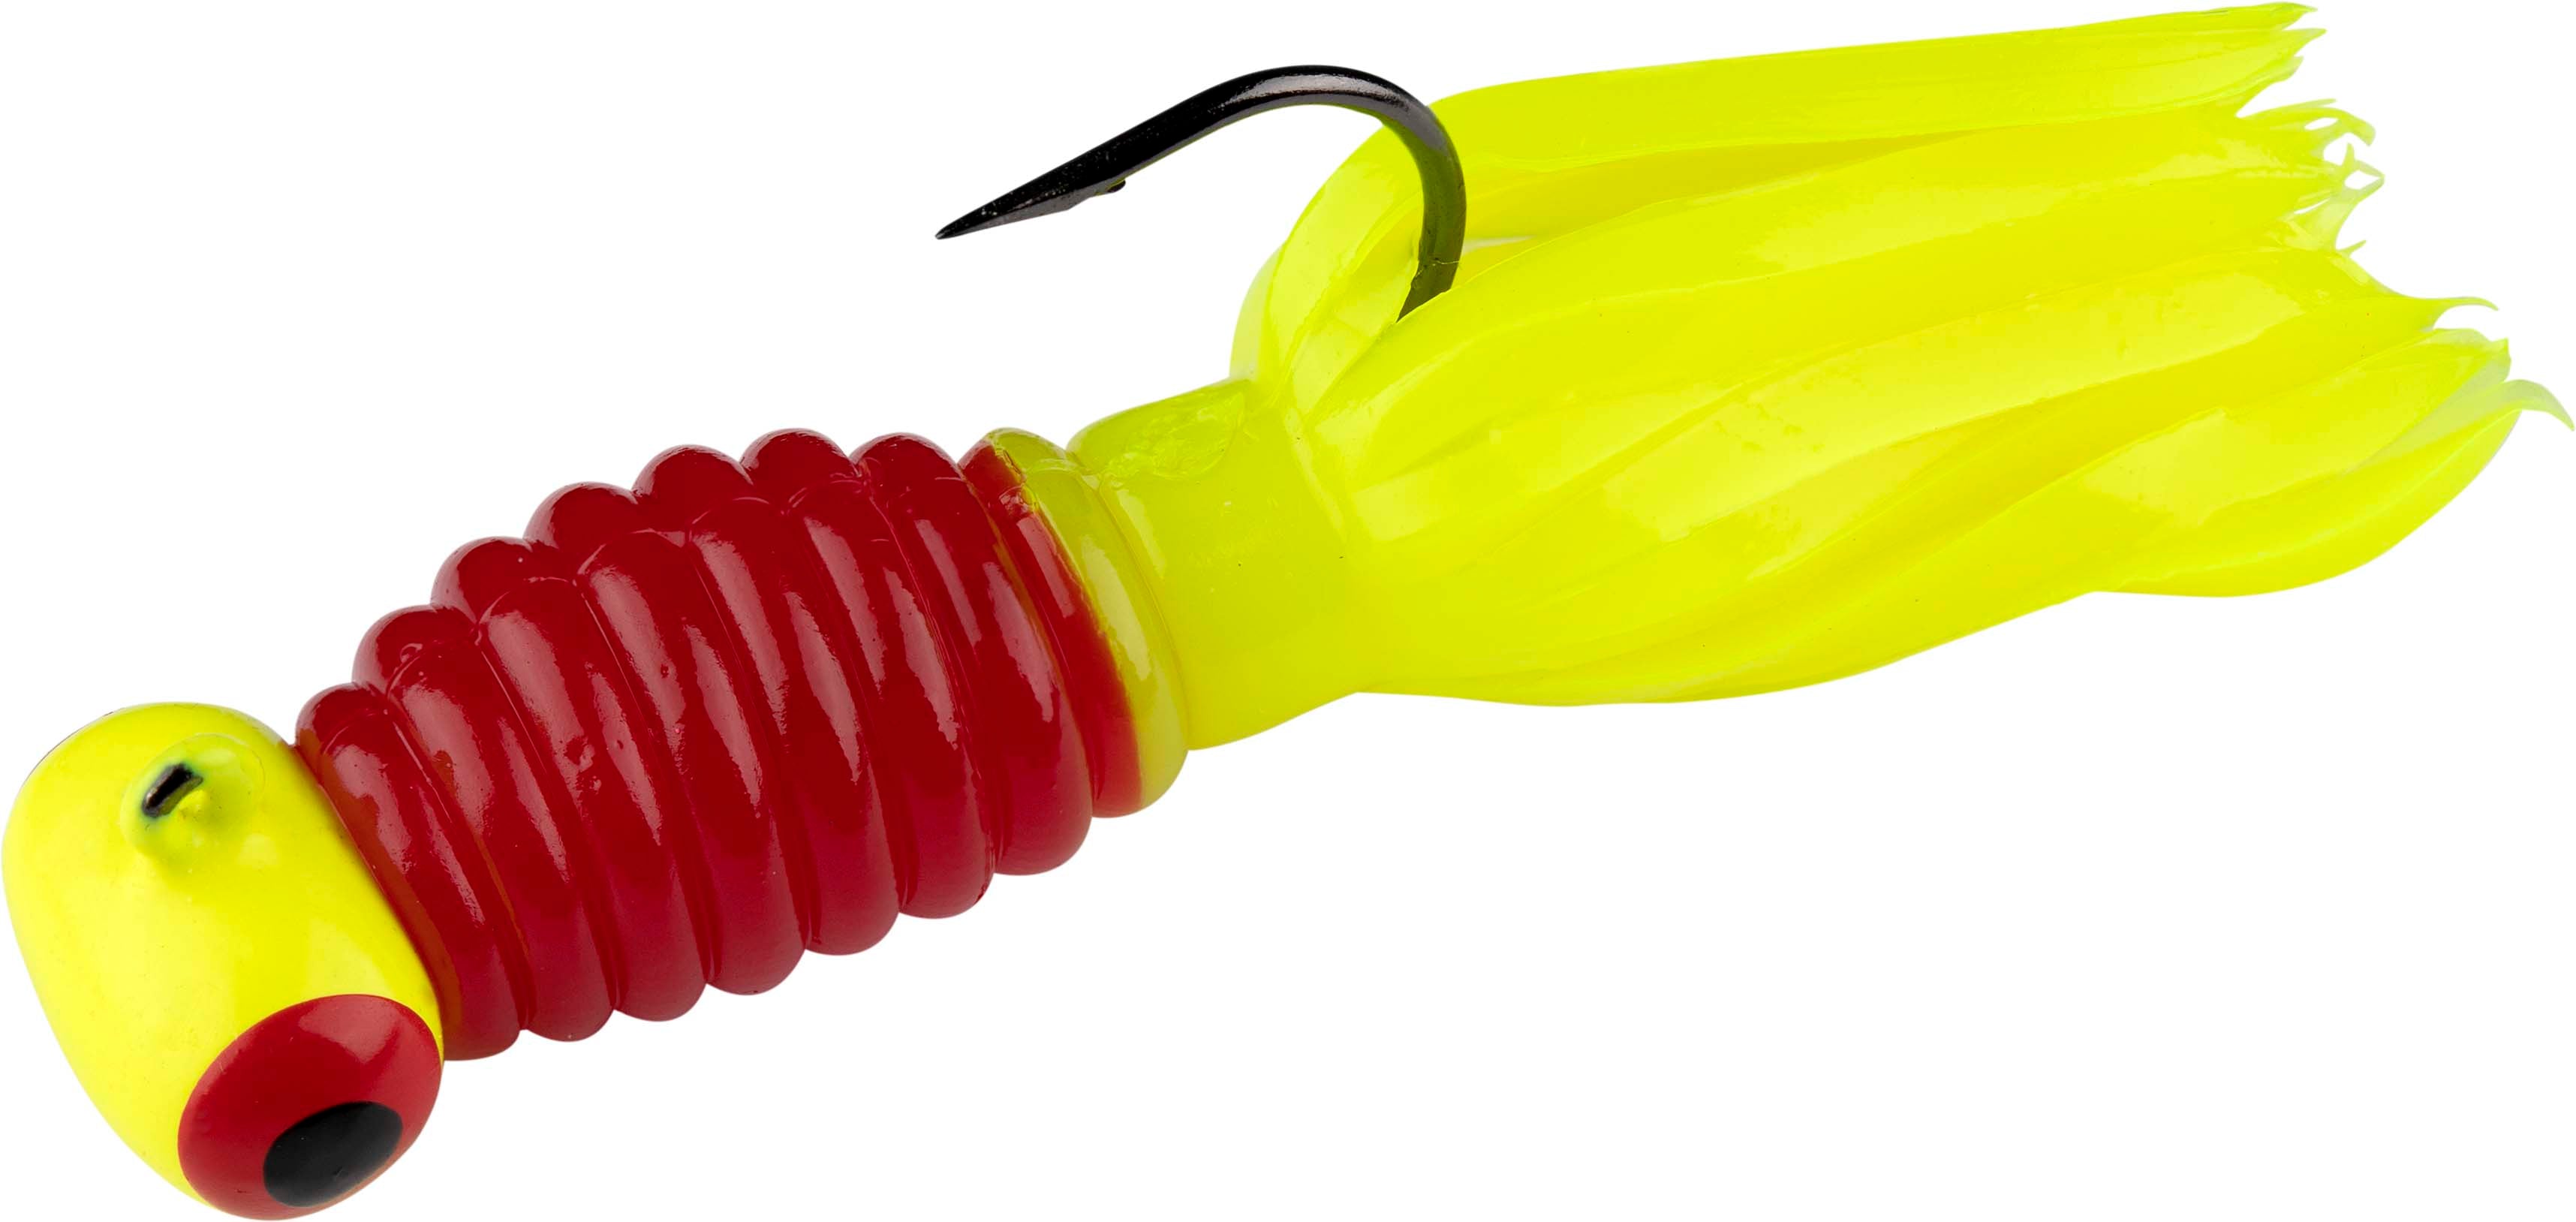 50 Crappie JIG Tubes Red/Blue Glit/Chartreuse